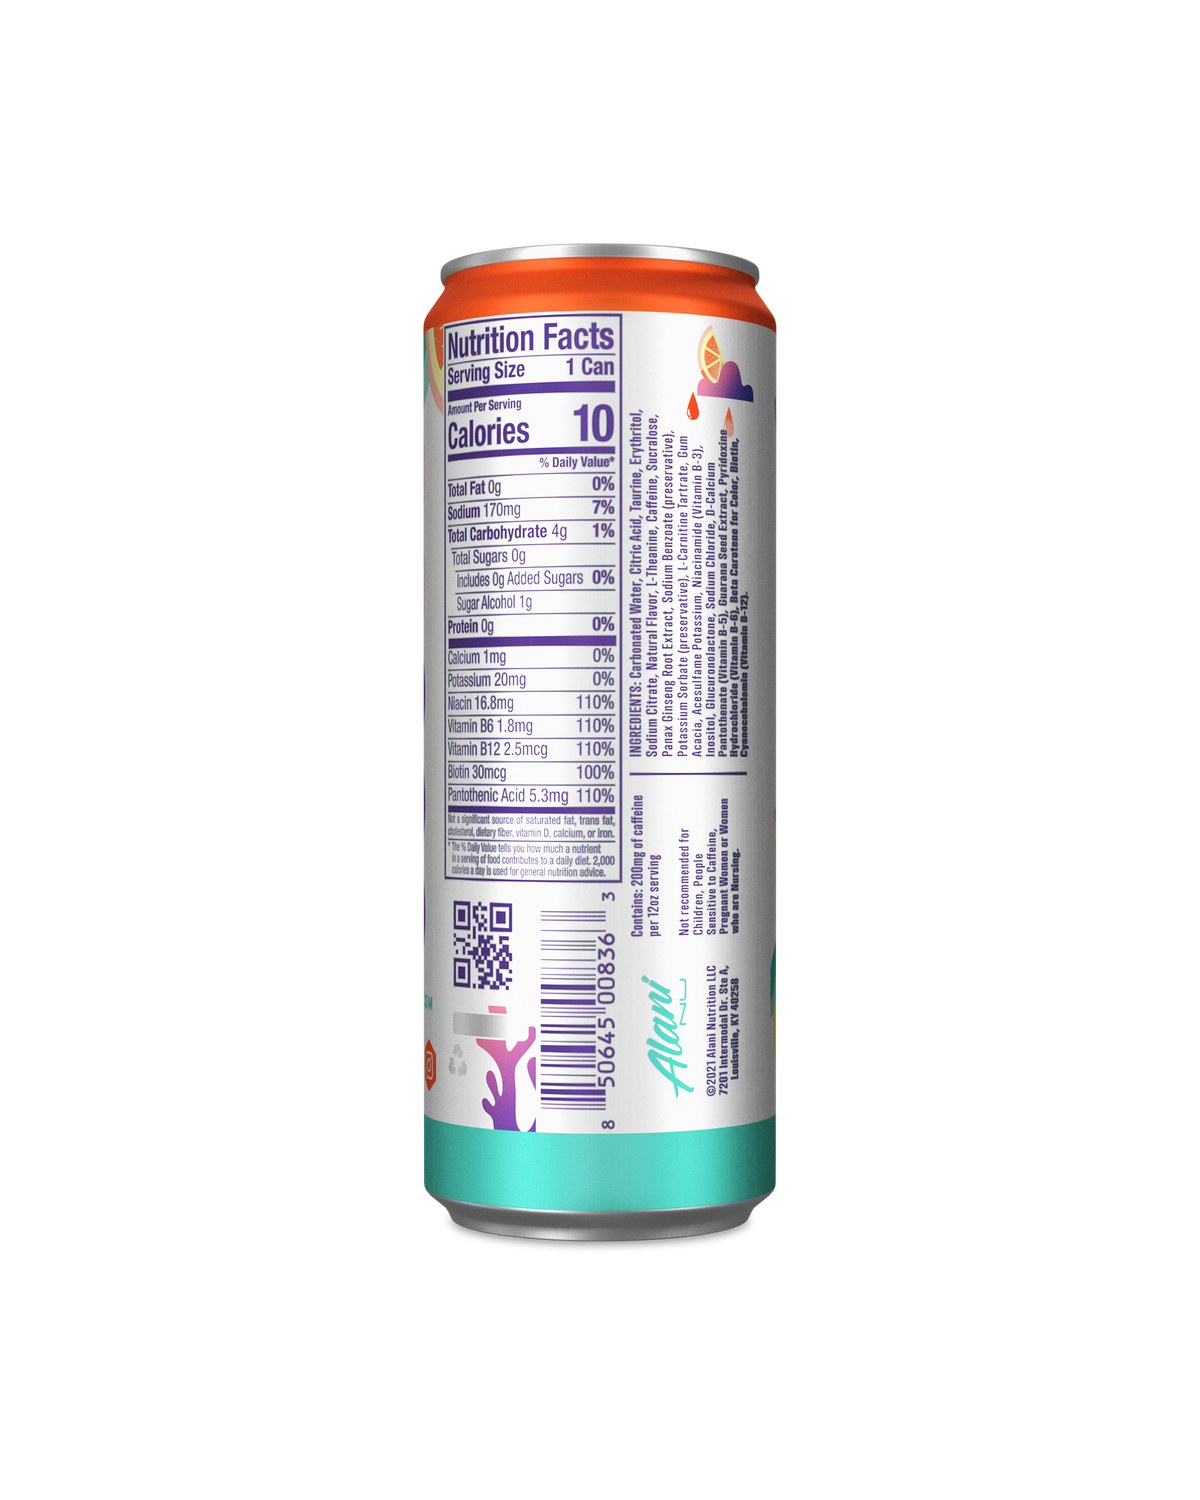 A can of Alani Nu Energy Drink - Mimosa showing its nutrition facts label, indicating it has 10 calories per serving, 0g of total fat, 7g of total carbohydrates, and 0g of protein. The serving size is 1 can.